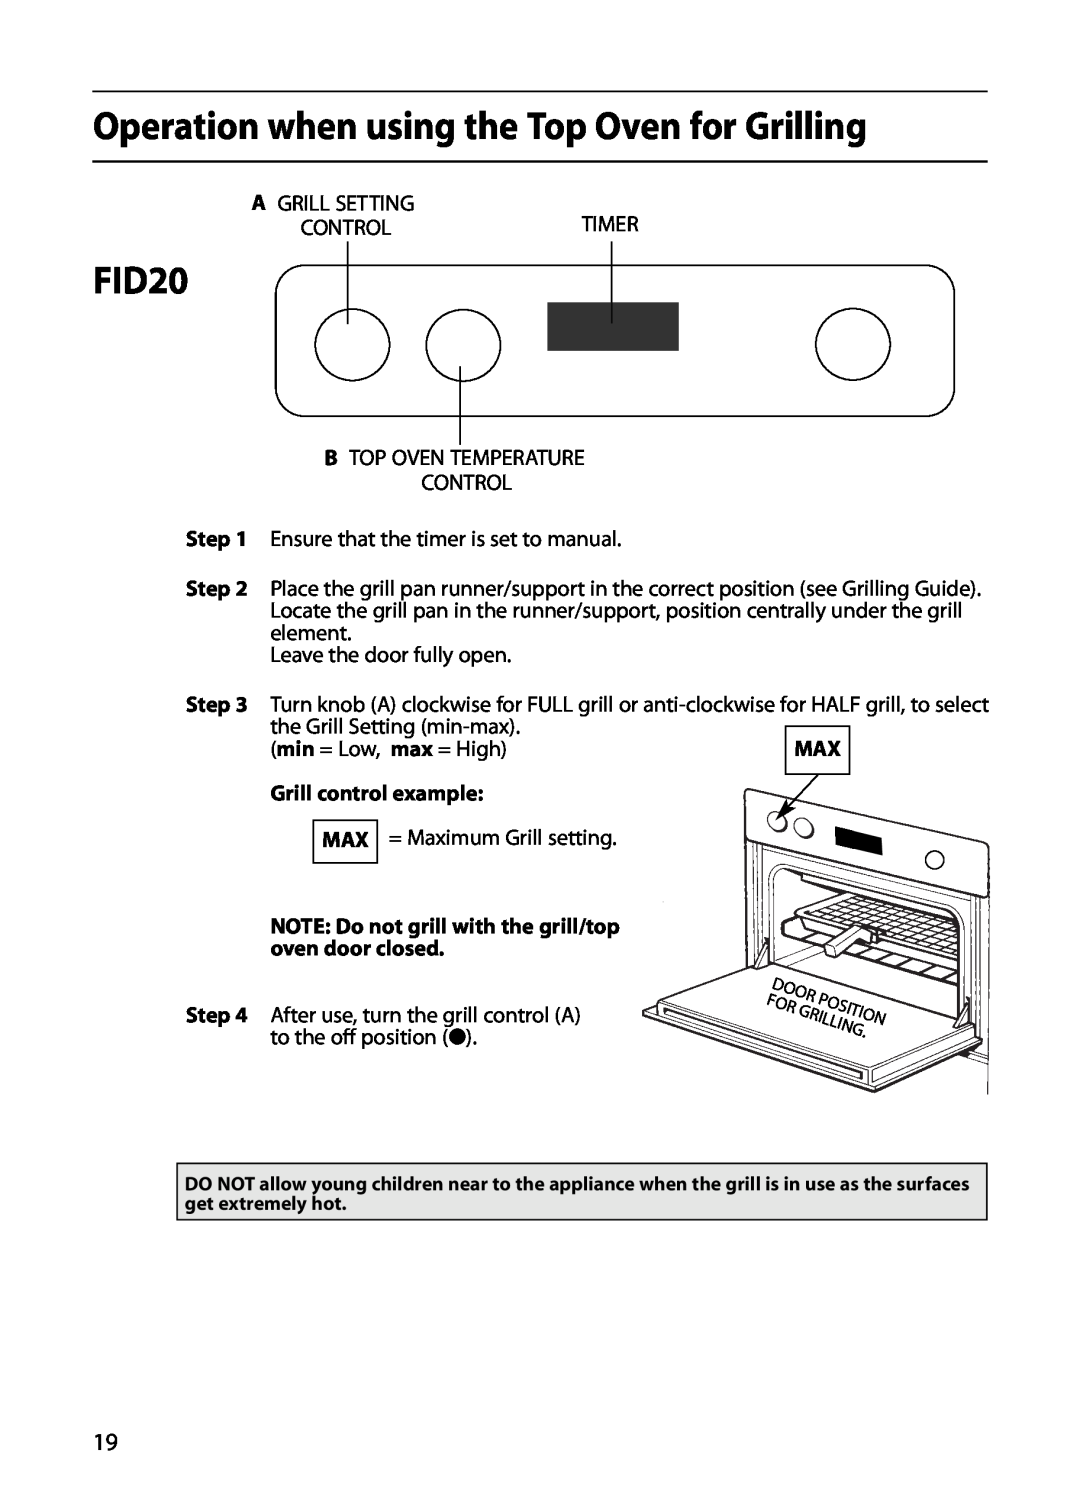 Indesit FIDM20 Mk2, FID20 Mk2 manual Operation when using the Top Oven for Grilling, Step, min = Low, max = High 